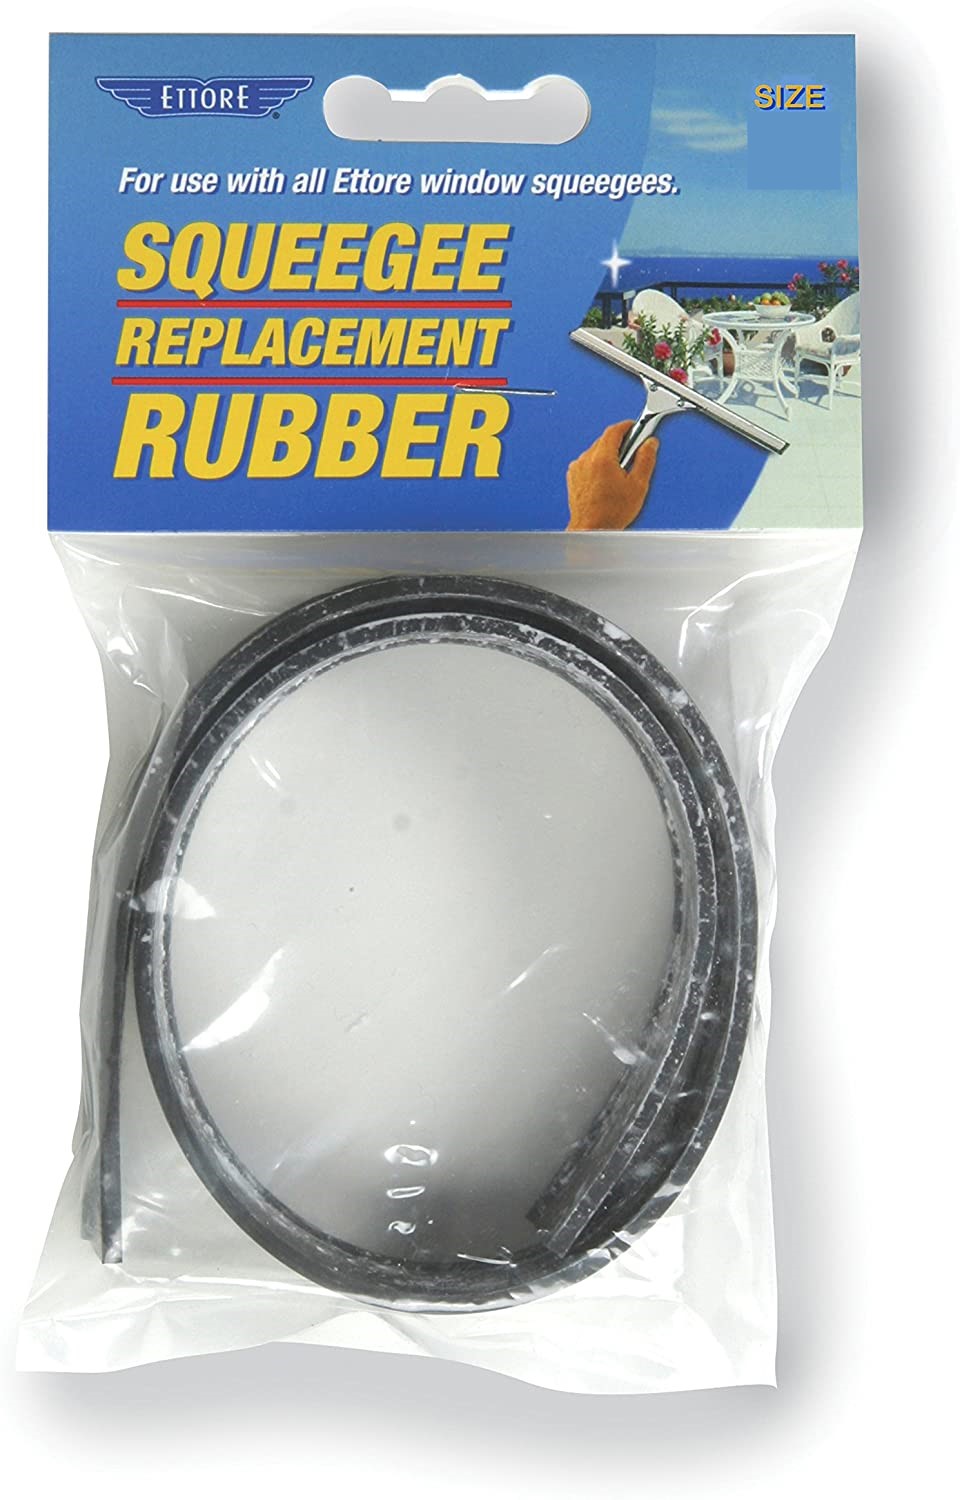 ET REPLACEMENT SQUEEGEE RUBBER 24